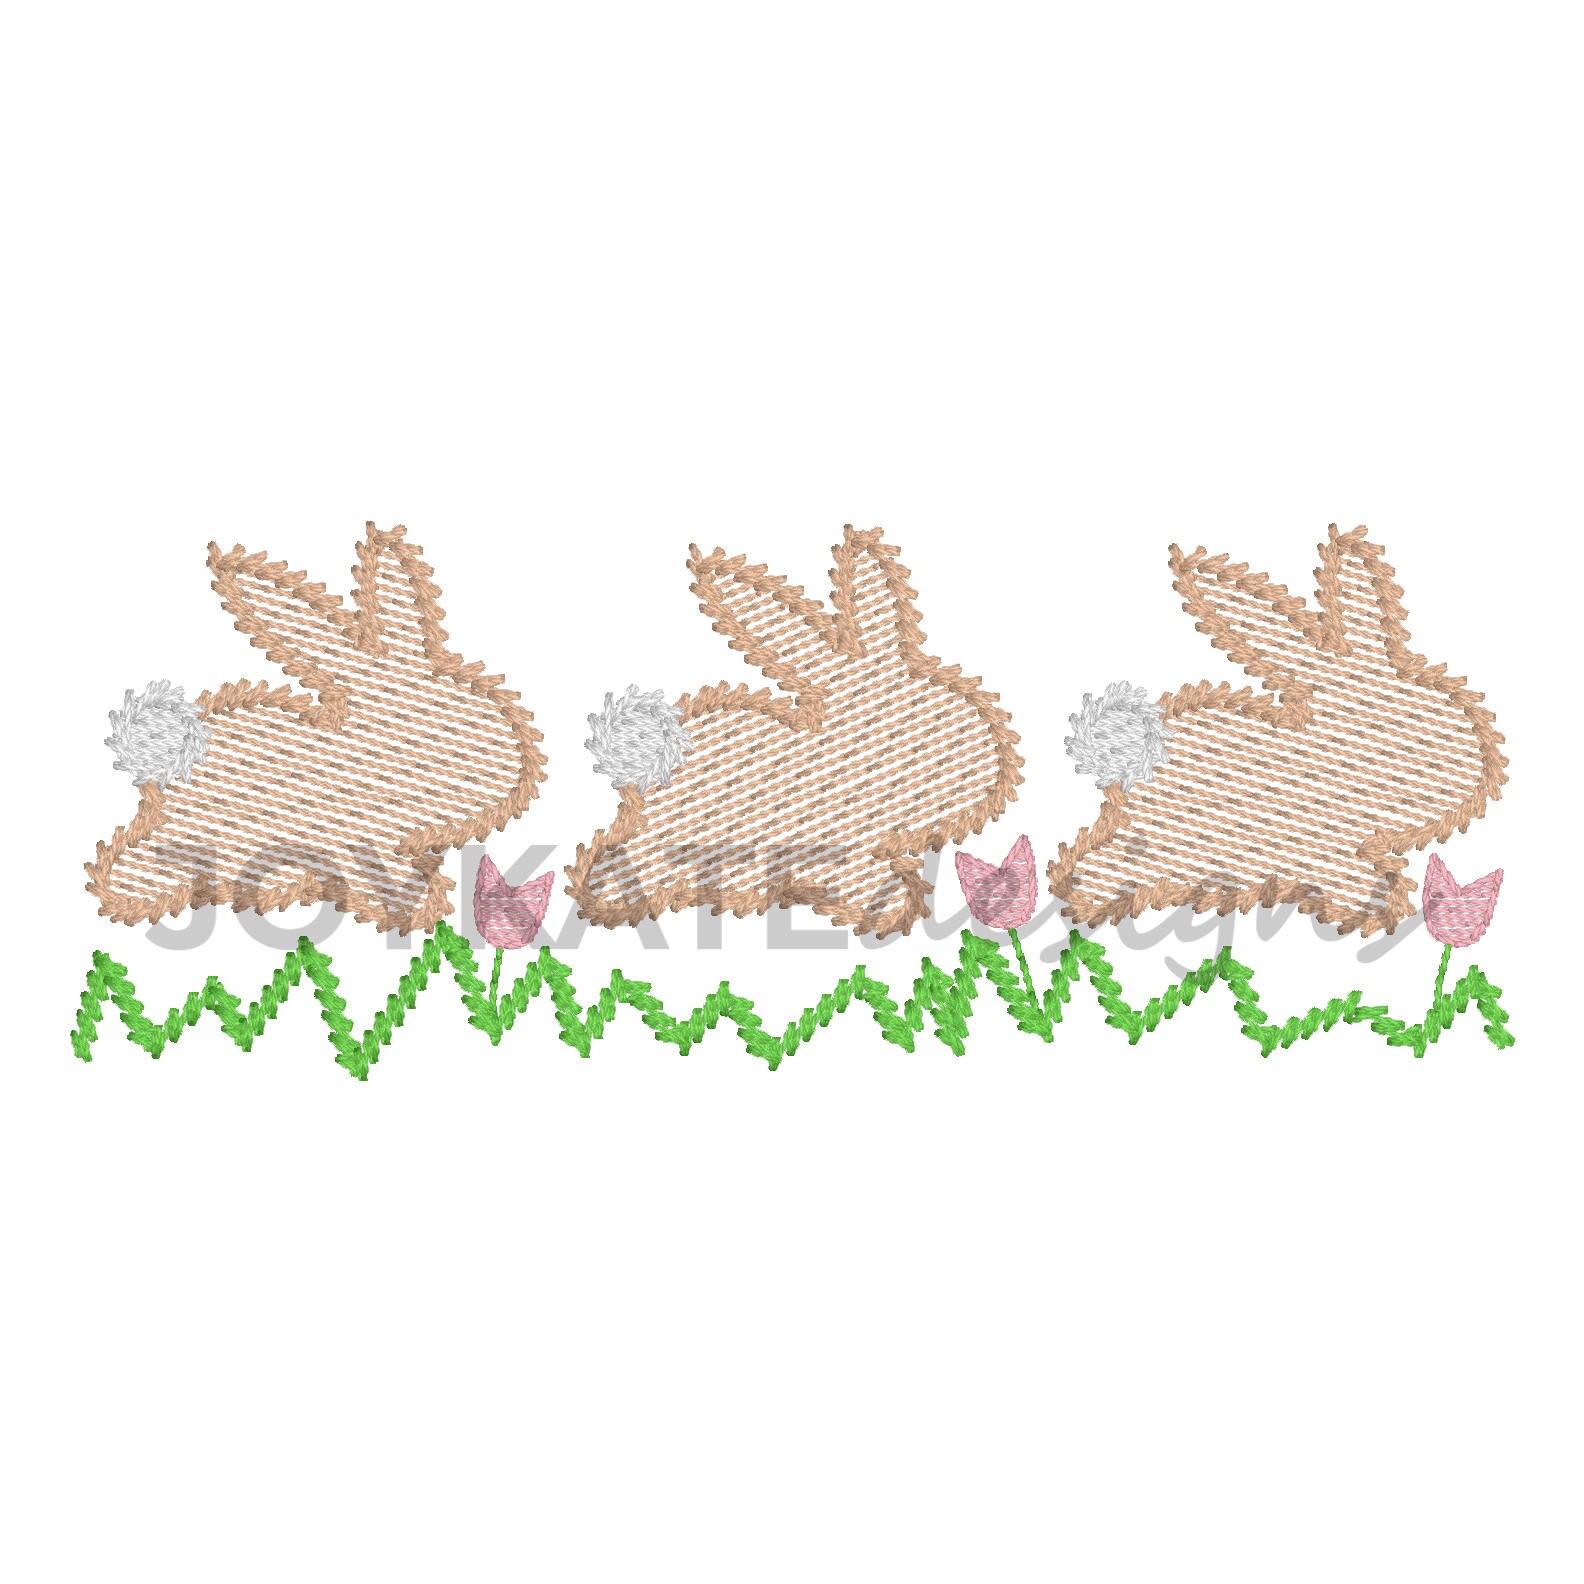 Three Bunnies Trio rabbit in a row Easter machine embroidery filled border designs 5 Sizes